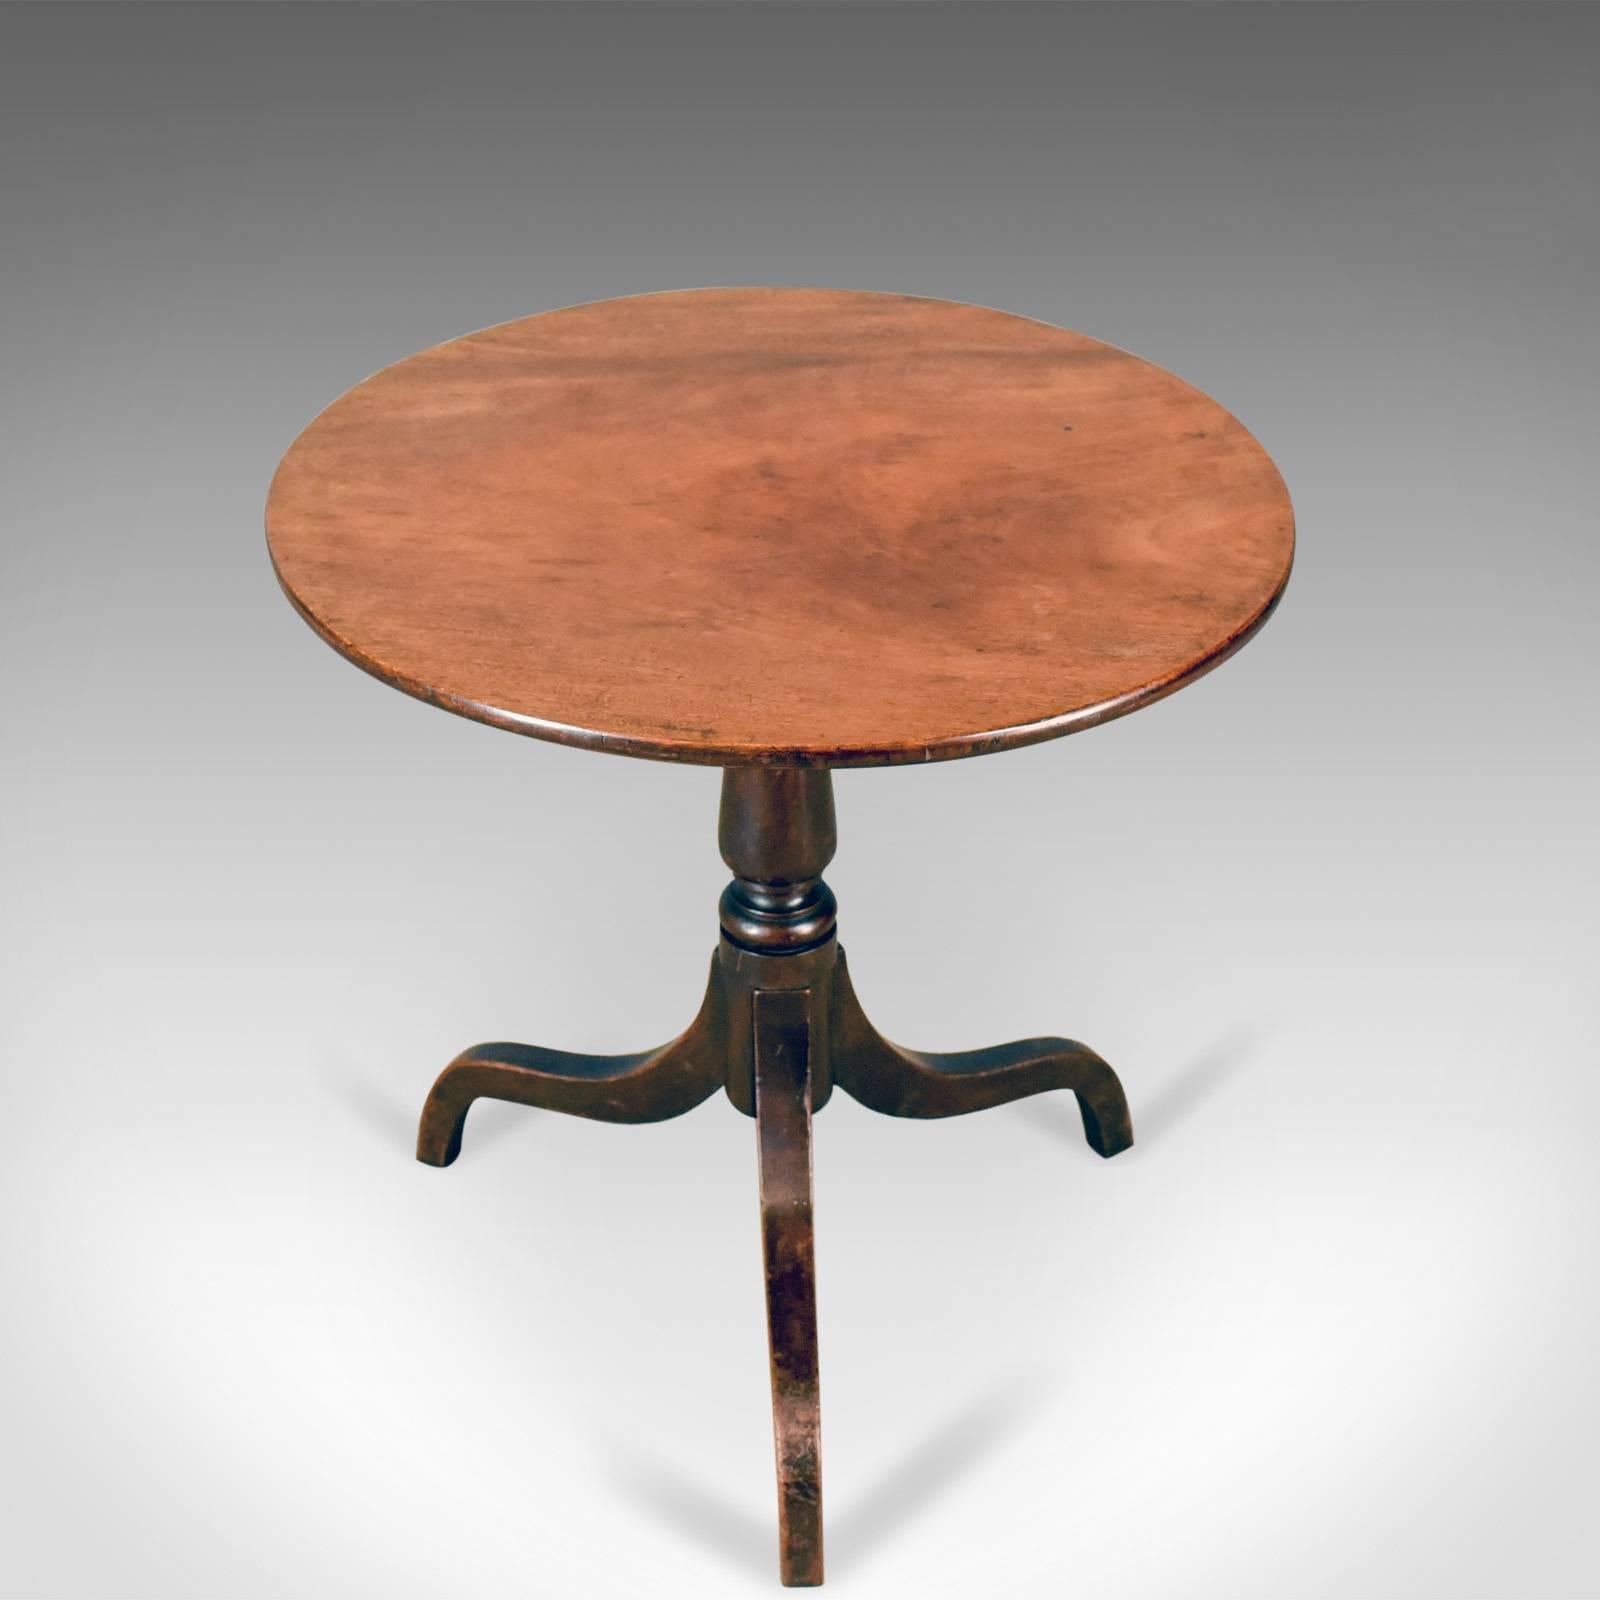 This is an antique side table, a circular, Georgian, mahogany tea table, English, circa 1800.

Appealing patina and grain interest in the mahogany
Good color depth shining through the wax polished finish
Modest proportions ideal as a lamp or